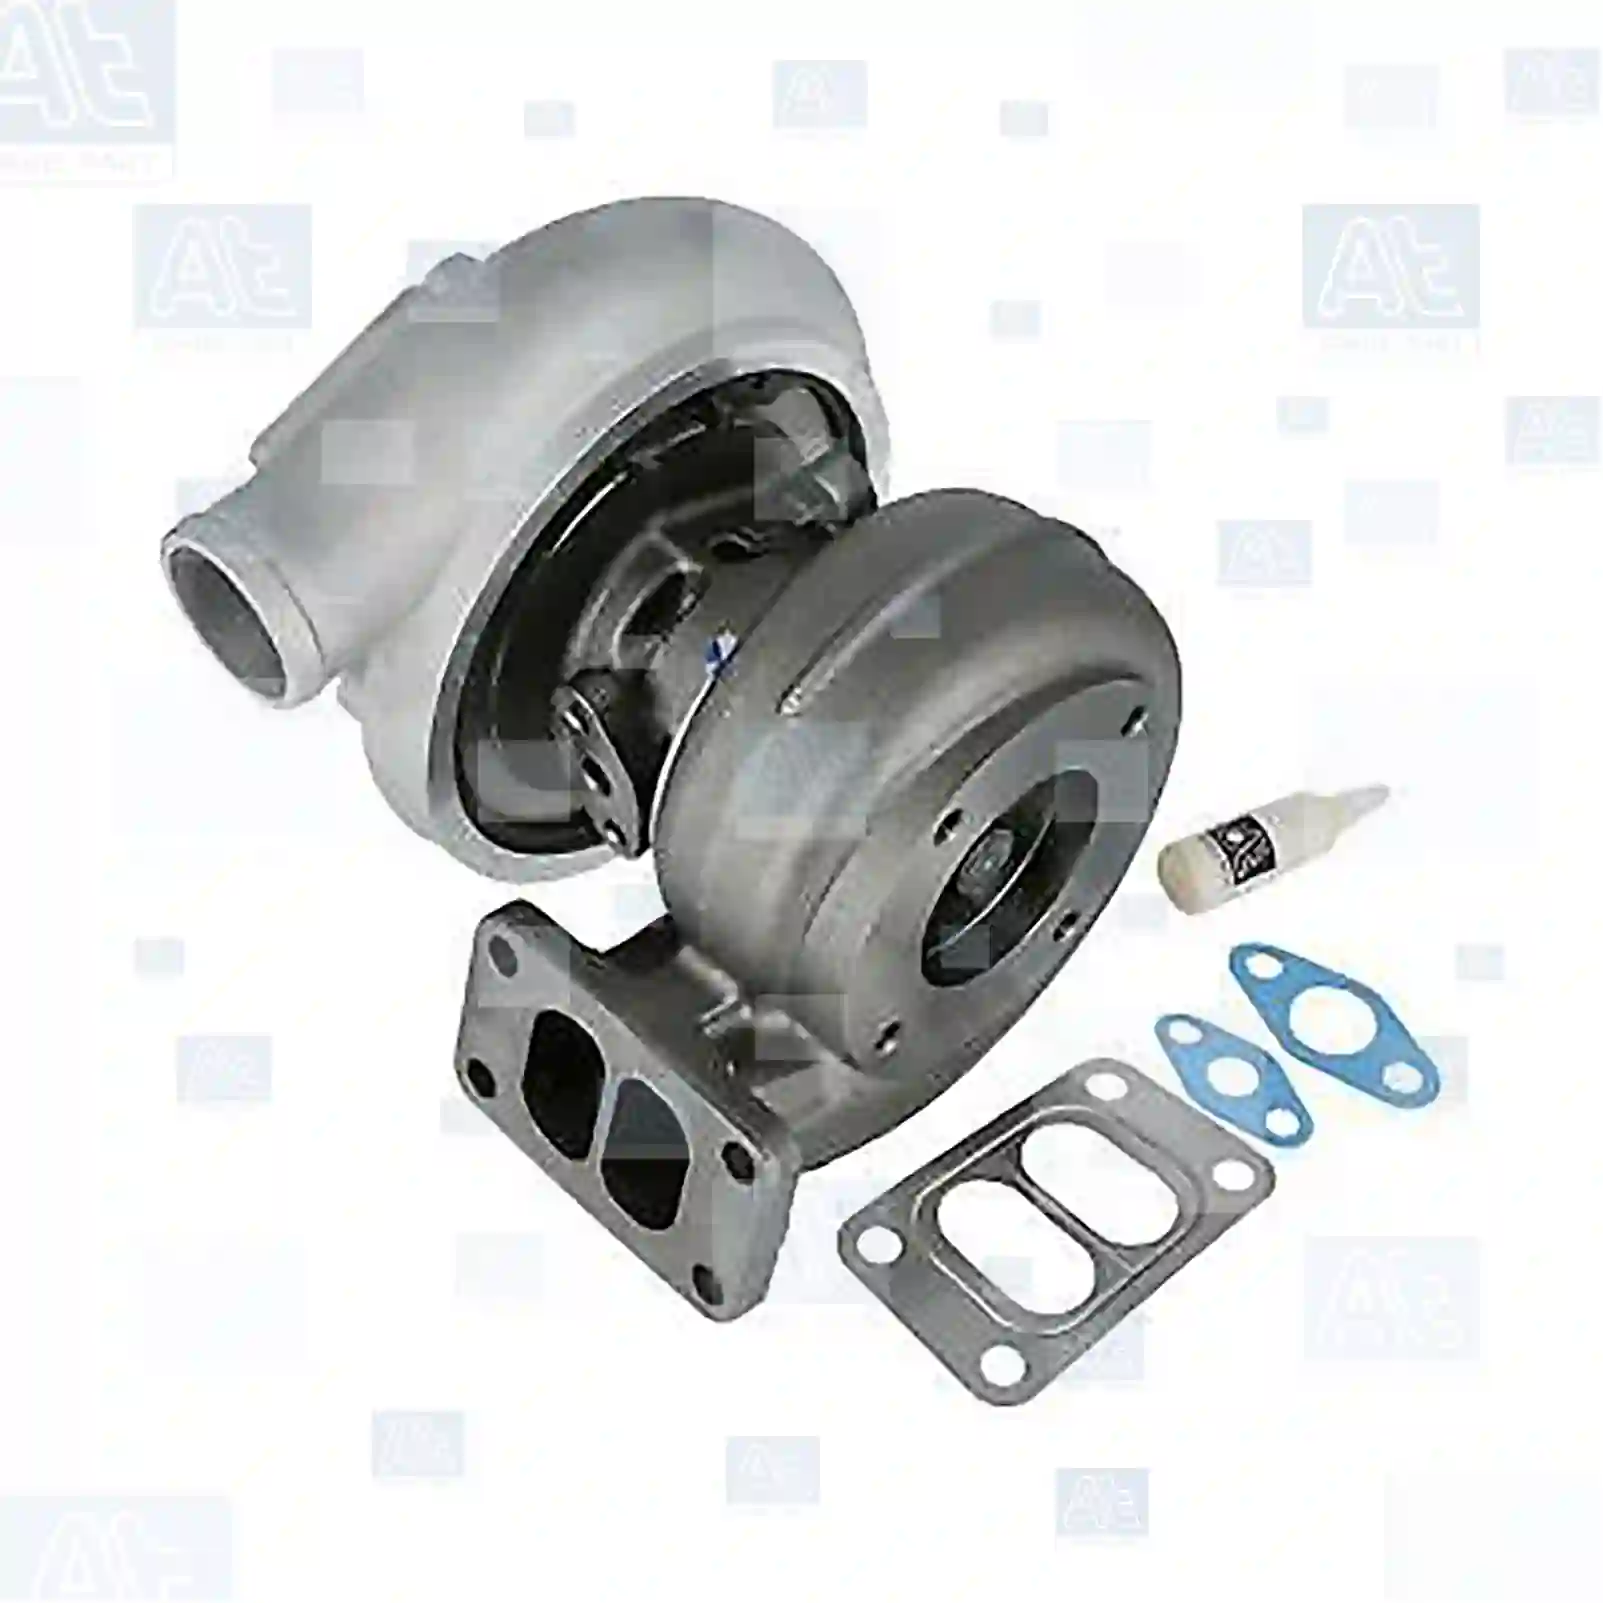 Turbocharger, with gasket kit, 77700377, 51091007262, 51091007278, 51091007299, 51091007314, 51091007316, 51091007324, 51091007333, 51091007341, 51091007342, 51091007344, 51091007345, 51091007387, 51091007447, 51091007448, 51091007449, 51091007450, 51091007456, 51091007457, 51091009278, 51091009299, 51091009314, 51091009316, 51091009333, 51091009387, 51091009447, 51091009449, 51091009450, 51091009457 ||  77700377 At Spare Part | Engine, Accelerator Pedal, Camshaft, Connecting Rod, Crankcase, Crankshaft, Cylinder Head, Engine Suspension Mountings, Exhaust Manifold, Exhaust Gas Recirculation, Filter Kits, Flywheel Housing, General Overhaul Kits, Engine, Intake Manifold, Oil Cleaner, Oil Cooler, Oil Filter, Oil Pump, Oil Sump, Piston & Liner, Sensor & Switch, Timing Case, Turbocharger, Cooling System, Belt Tensioner, Coolant Filter, Coolant Pipe, Corrosion Prevention Agent, Drive, Expansion Tank, Fan, Intercooler, Monitors & Gauges, Radiator, Thermostat, V-Belt / Timing belt, Water Pump, Fuel System, Electronical Injector Unit, Feed Pump, Fuel Filter, cpl., Fuel Gauge Sender,  Fuel Line, Fuel Pump, Fuel Tank, Injection Line Kit, Injection Pump, Exhaust System, Clutch & Pedal, Gearbox, Propeller Shaft, Axles, Brake System, Hubs & Wheels, Suspension, Leaf Spring, Universal Parts / Accessories, Steering, Electrical System, Cabin Turbocharger, with gasket kit, 77700377, 51091007262, 51091007278, 51091007299, 51091007314, 51091007316, 51091007324, 51091007333, 51091007341, 51091007342, 51091007344, 51091007345, 51091007387, 51091007447, 51091007448, 51091007449, 51091007450, 51091007456, 51091007457, 51091009278, 51091009299, 51091009314, 51091009316, 51091009333, 51091009387, 51091009447, 51091009449, 51091009450, 51091009457 ||  77700377 At Spare Part | Engine, Accelerator Pedal, Camshaft, Connecting Rod, Crankcase, Crankshaft, Cylinder Head, Engine Suspension Mountings, Exhaust Manifold, Exhaust Gas Recirculation, Filter Kits, Flywheel Housing, General Overhaul Kits, Engine, Intake Manifold, Oil Cleaner, Oil Cooler, Oil Filter, Oil Pump, Oil Sump, Piston & Liner, Sensor & Switch, Timing Case, Turbocharger, Cooling System, Belt Tensioner, Coolant Filter, Coolant Pipe, Corrosion Prevention Agent, Drive, Expansion Tank, Fan, Intercooler, Monitors & Gauges, Radiator, Thermostat, V-Belt / Timing belt, Water Pump, Fuel System, Electronical Injector Unit, Feed Pump, Fuel Filter, cpl., Fuel Gauge Sender,  Fuel Line, Fuel Pump, Fuel Tank, Injection Line Kit, Injection Pump, Exhaust System, Clutch & Pedal, Gearbox, Propeller Shaft, Axles, Brake System, Hubs & Wheels, Suspension, Leaf Spring, Universal Parts / Accessories, Steering, Electrical System, Cabin